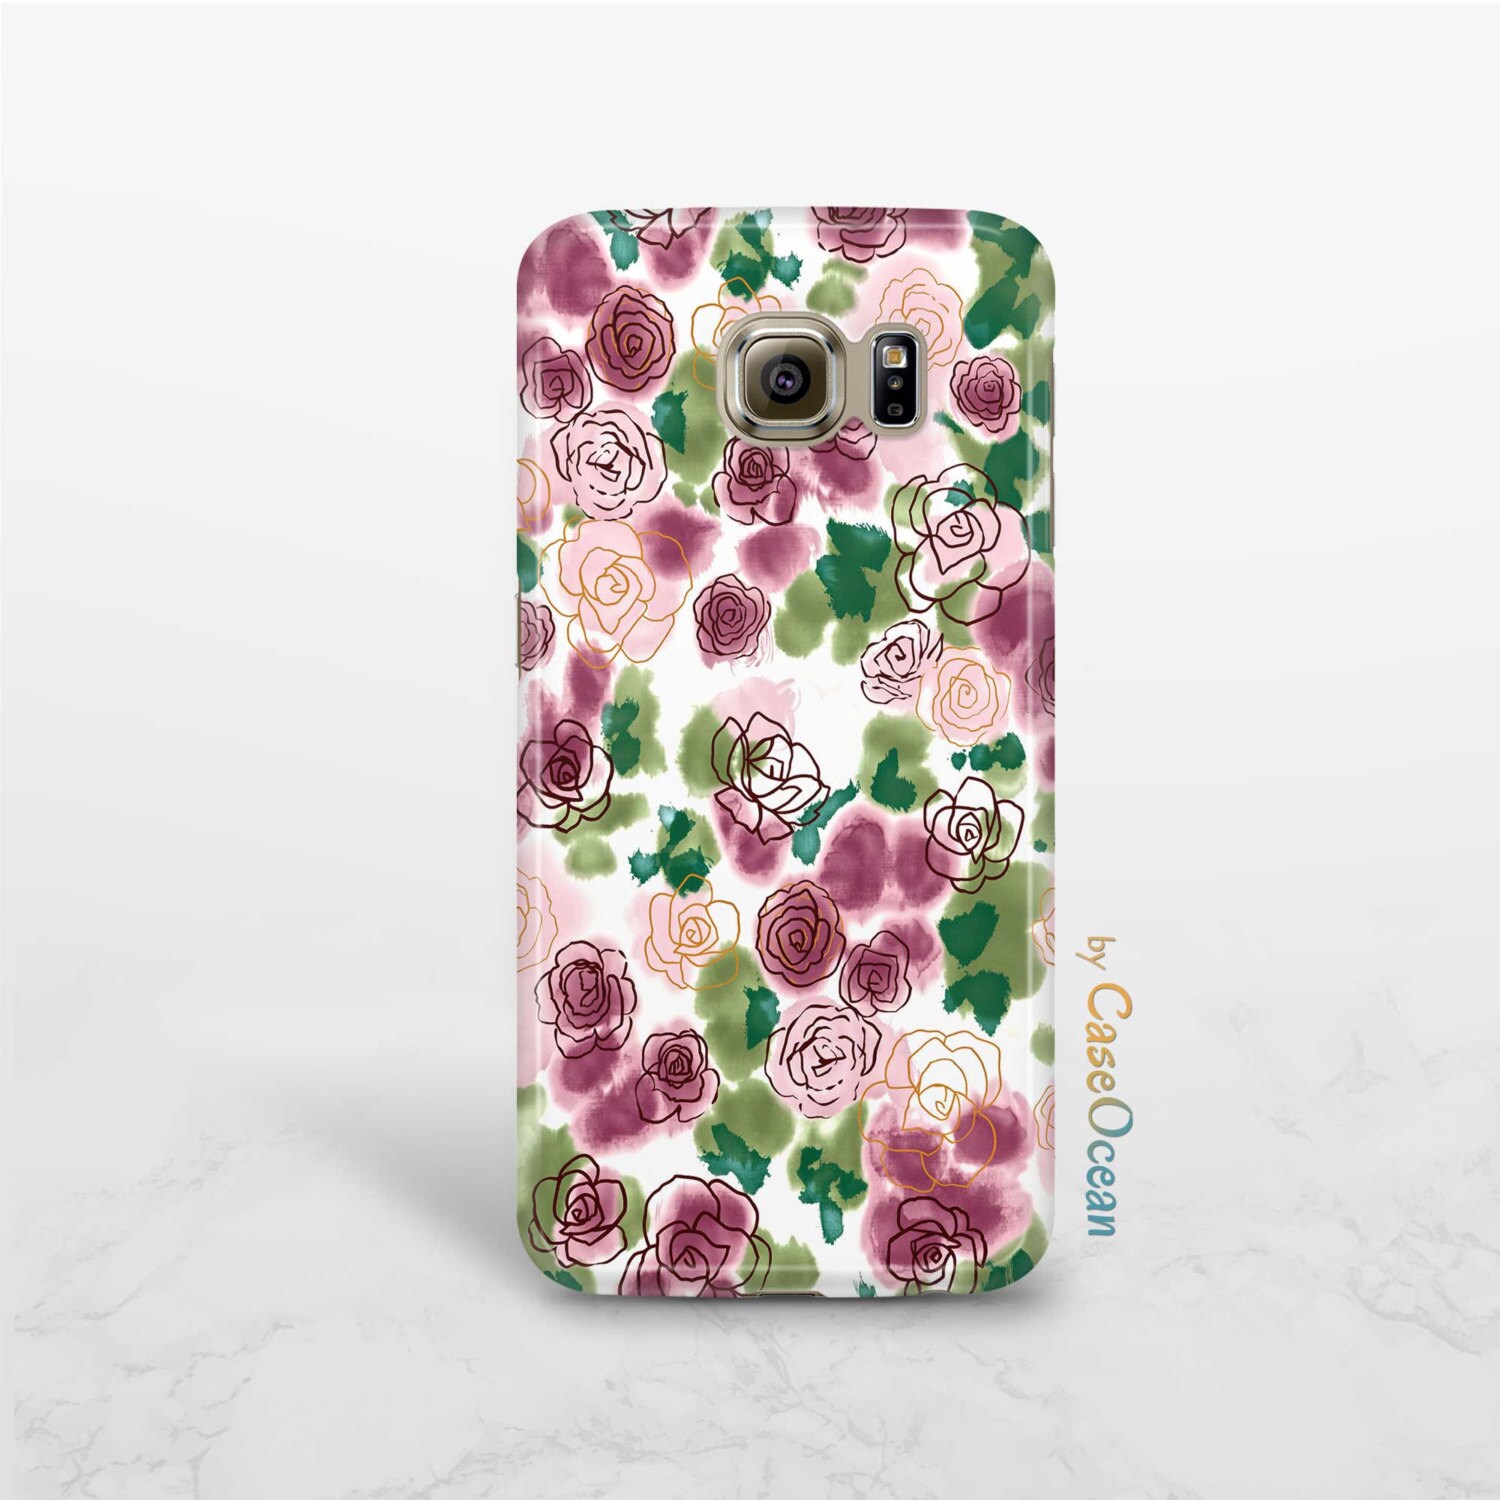 Floral phone case iPhone SE 5 5s phone case iPhone 7 6 6s